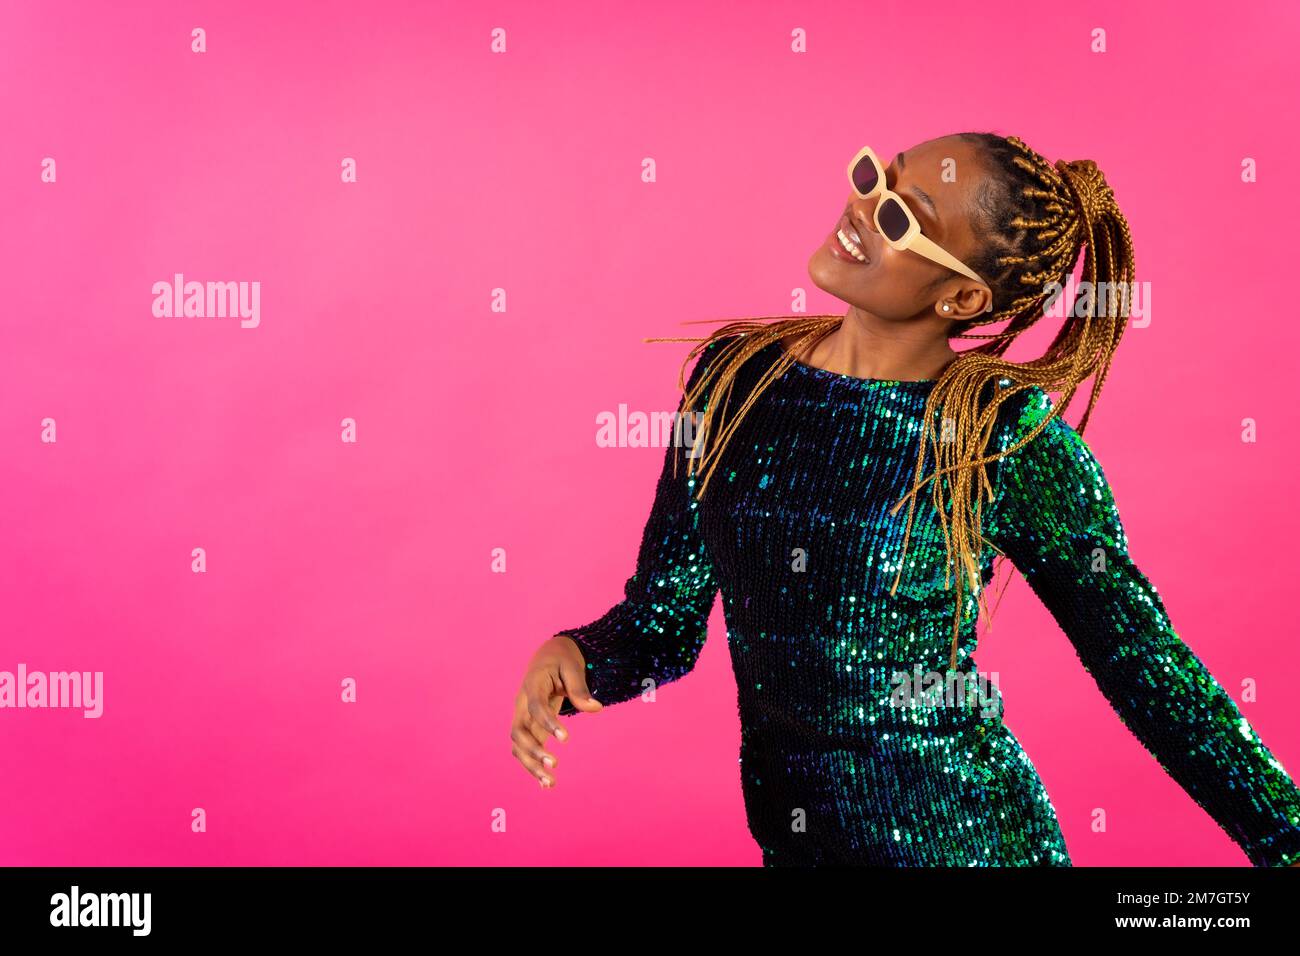 African young woman with party braids on a pink background, studio portrait having fun Stock Photo